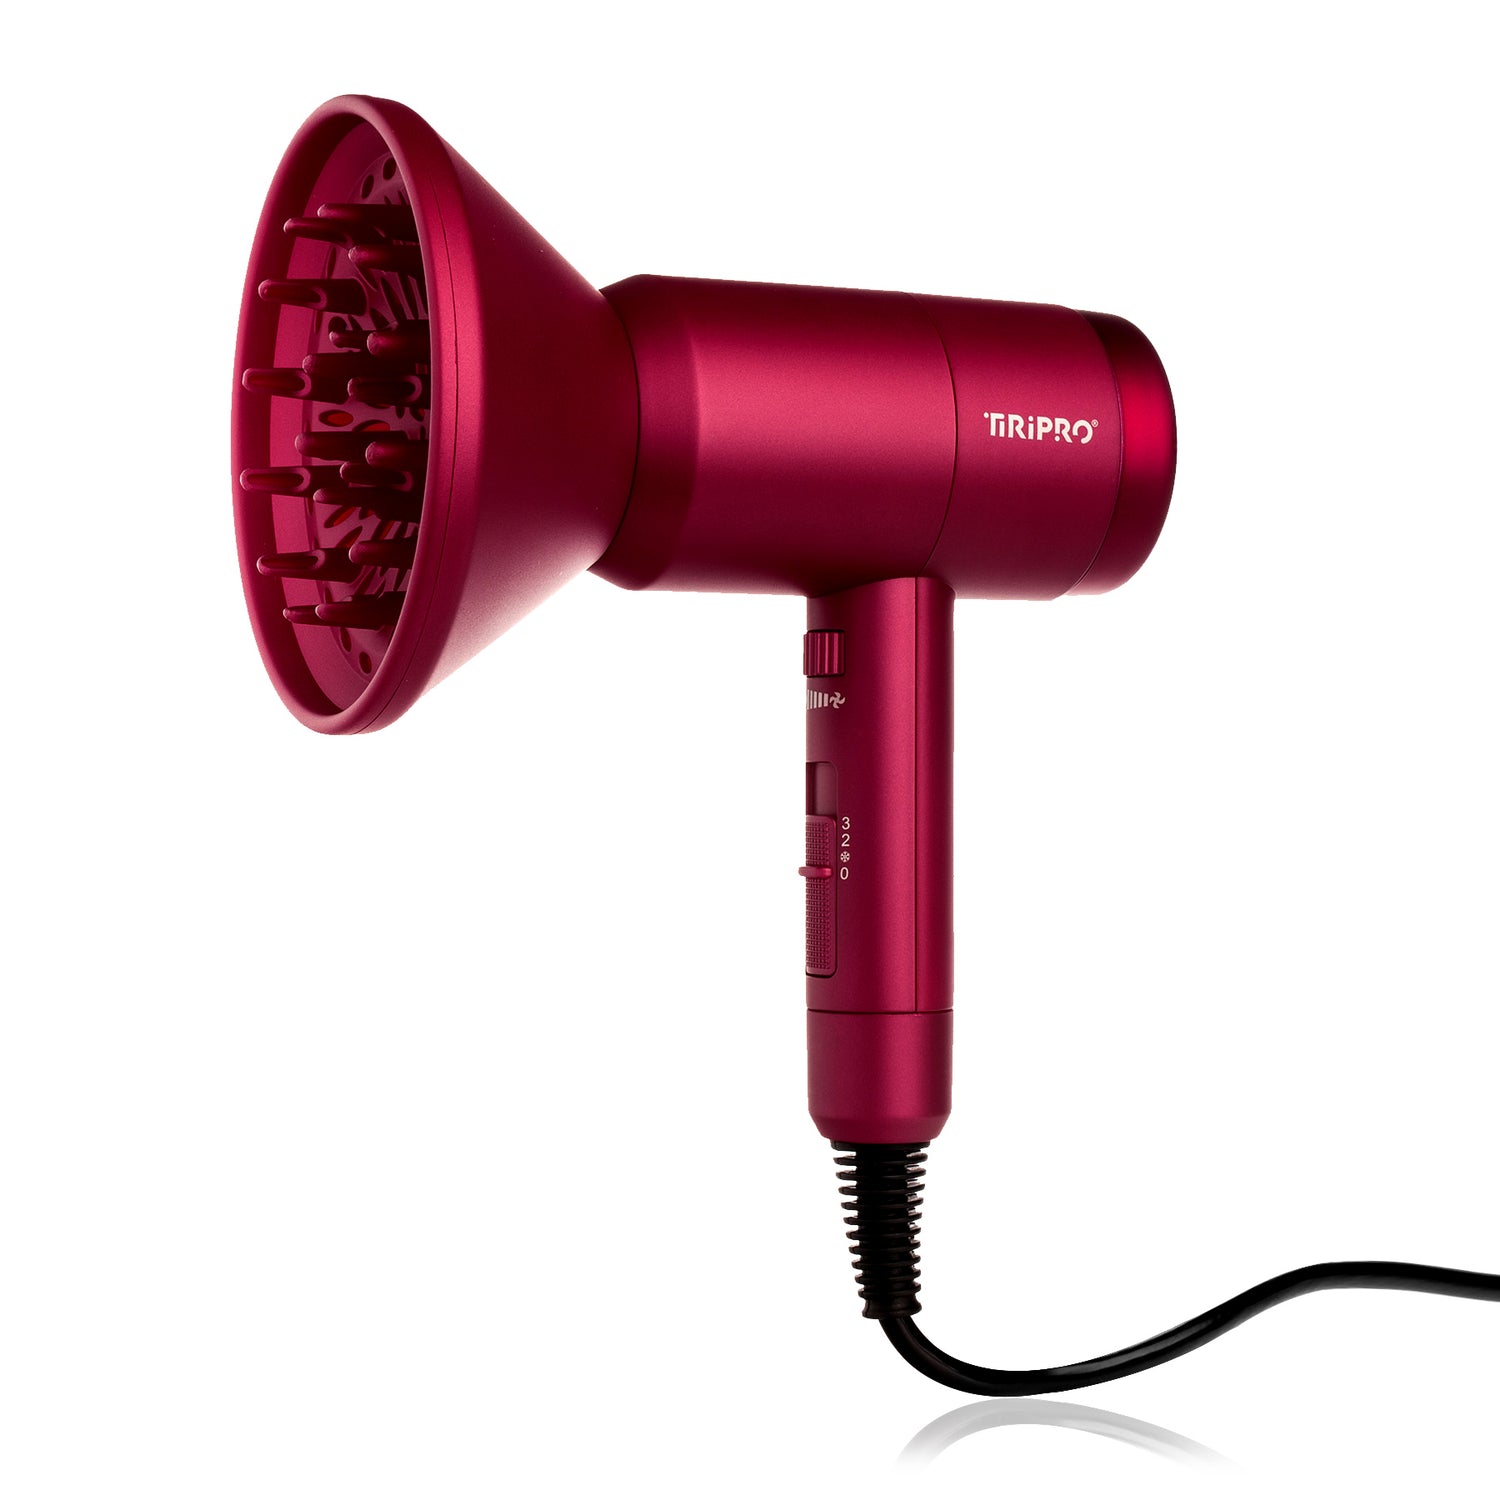 Prisma Pro Dryer with Adjustable Airflow Technology (Accessories Included) - Red